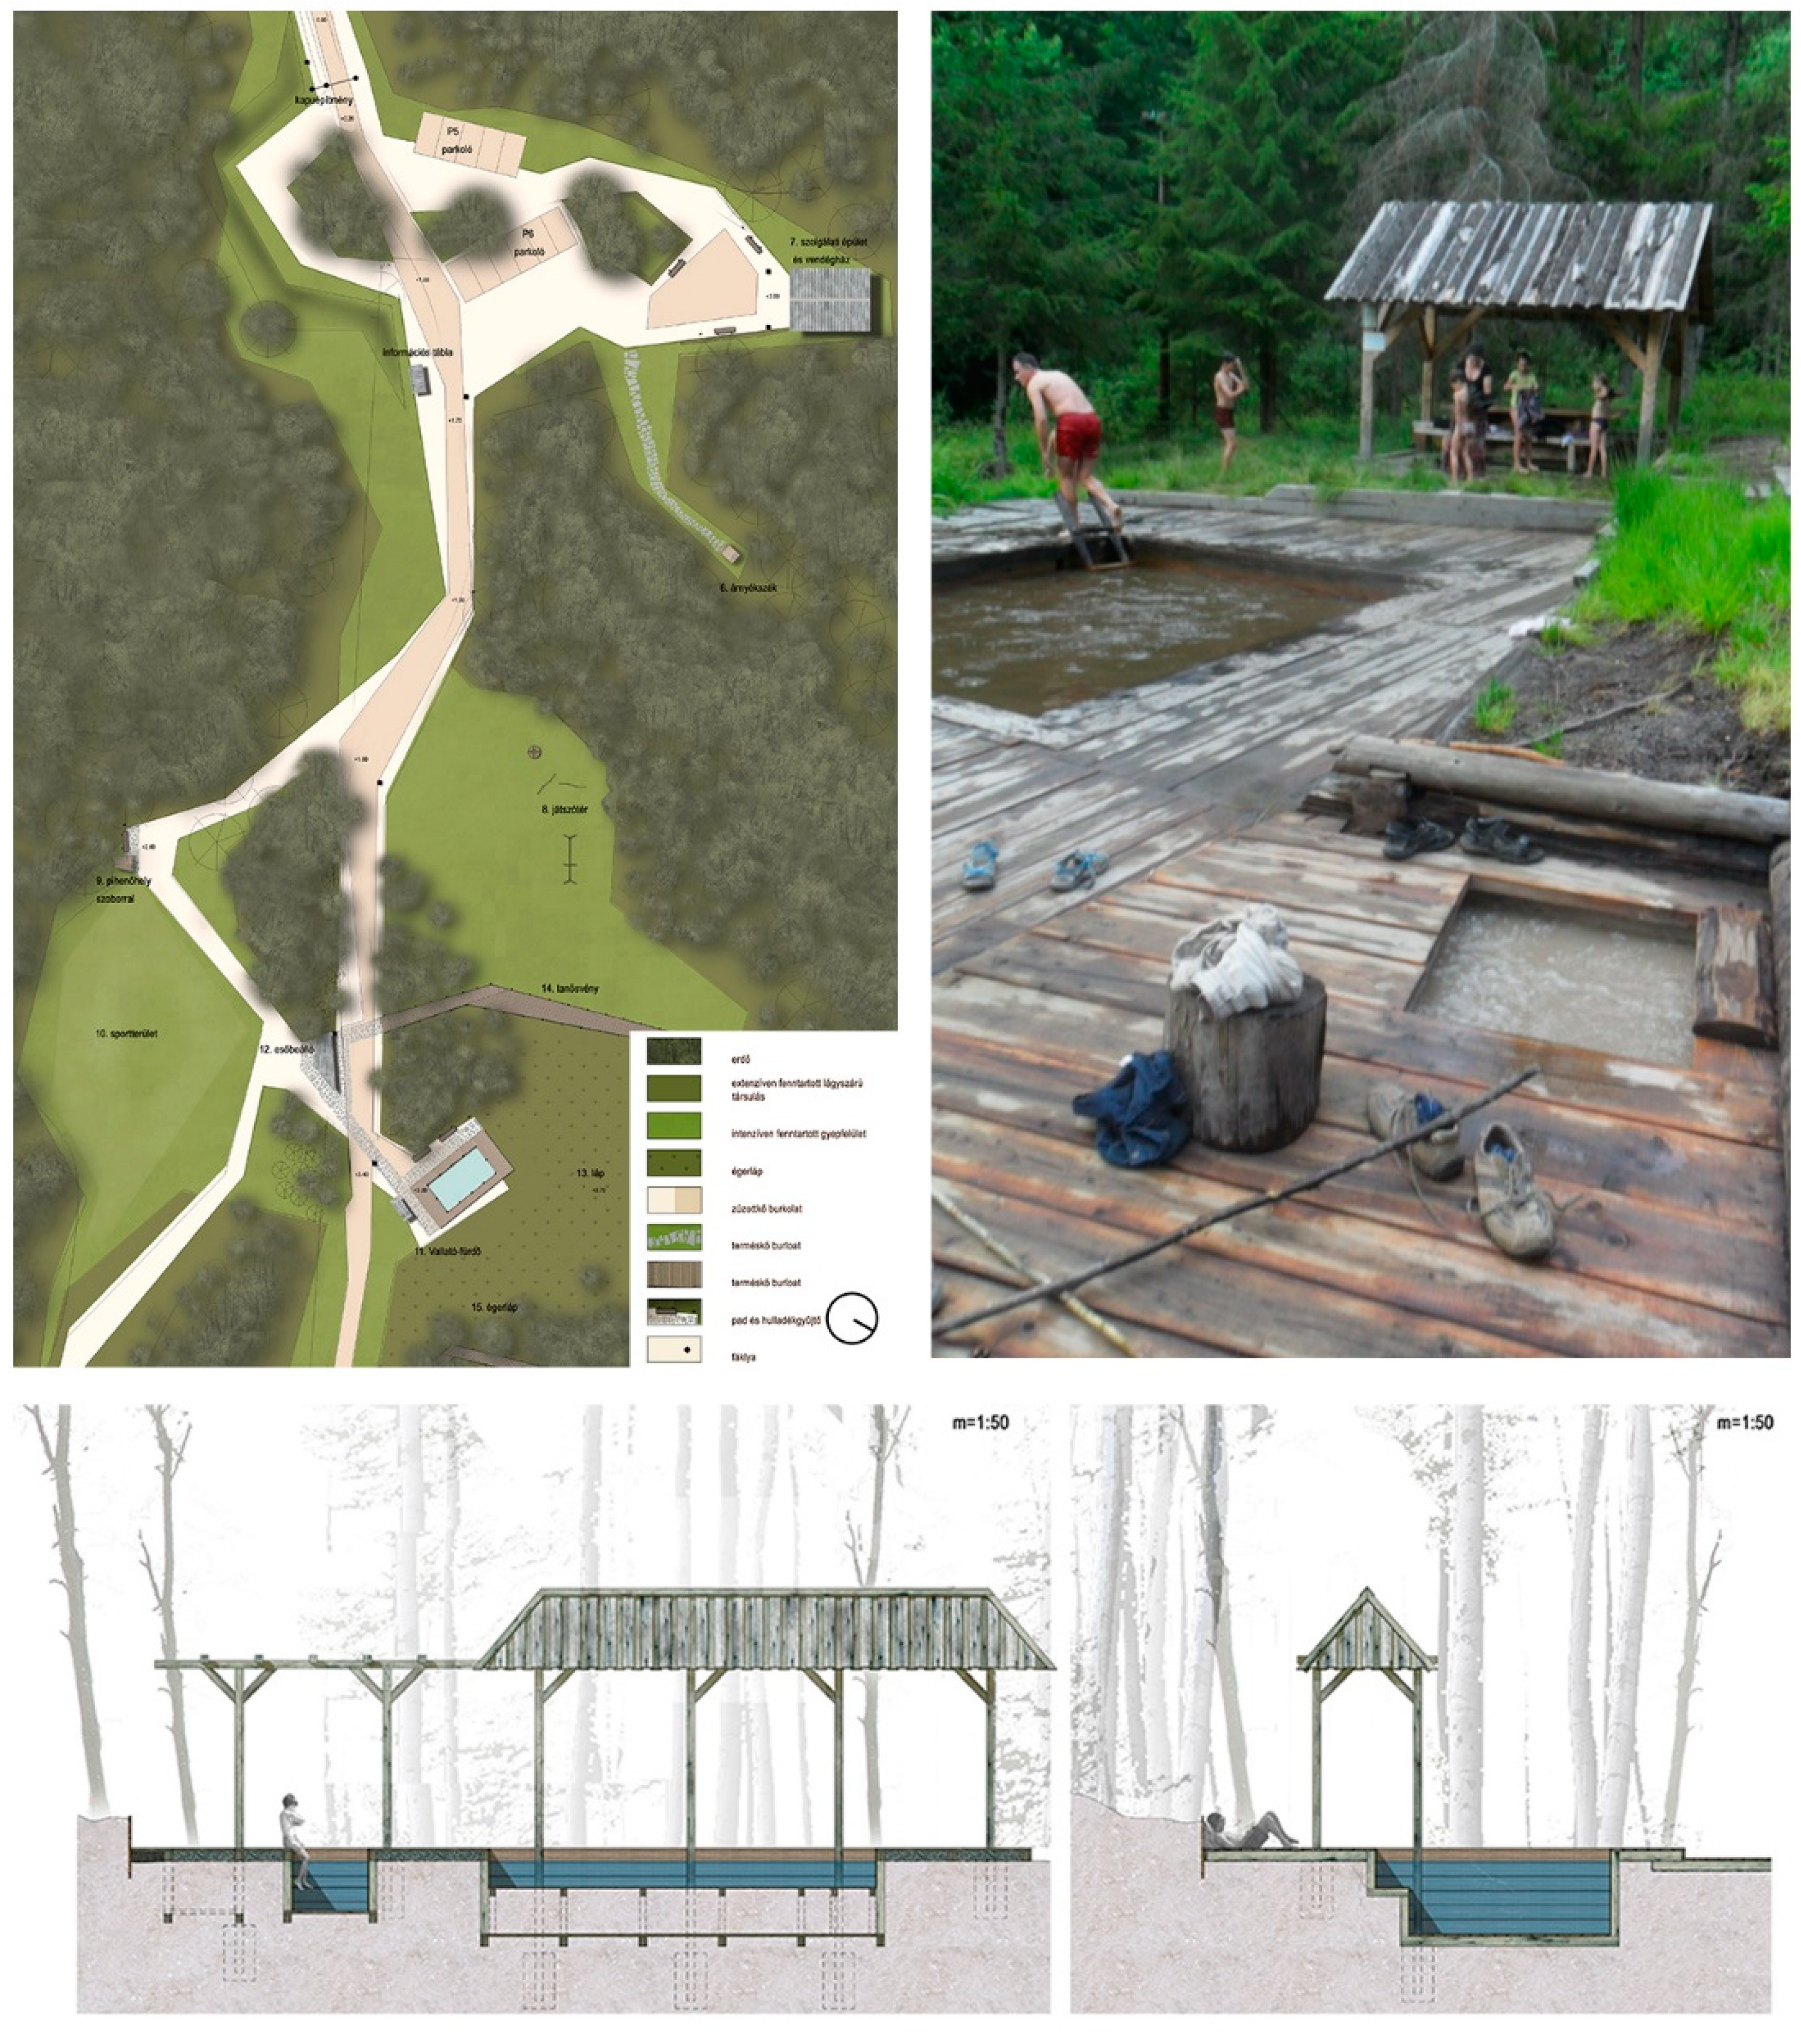 Land | Free Full-Text | Participatory Landscape Design and Water  Management&mdash;A Sustainable Strategy for Renovation of Vernacular Baths  and Landscape Protection in Szeklerland, Romania